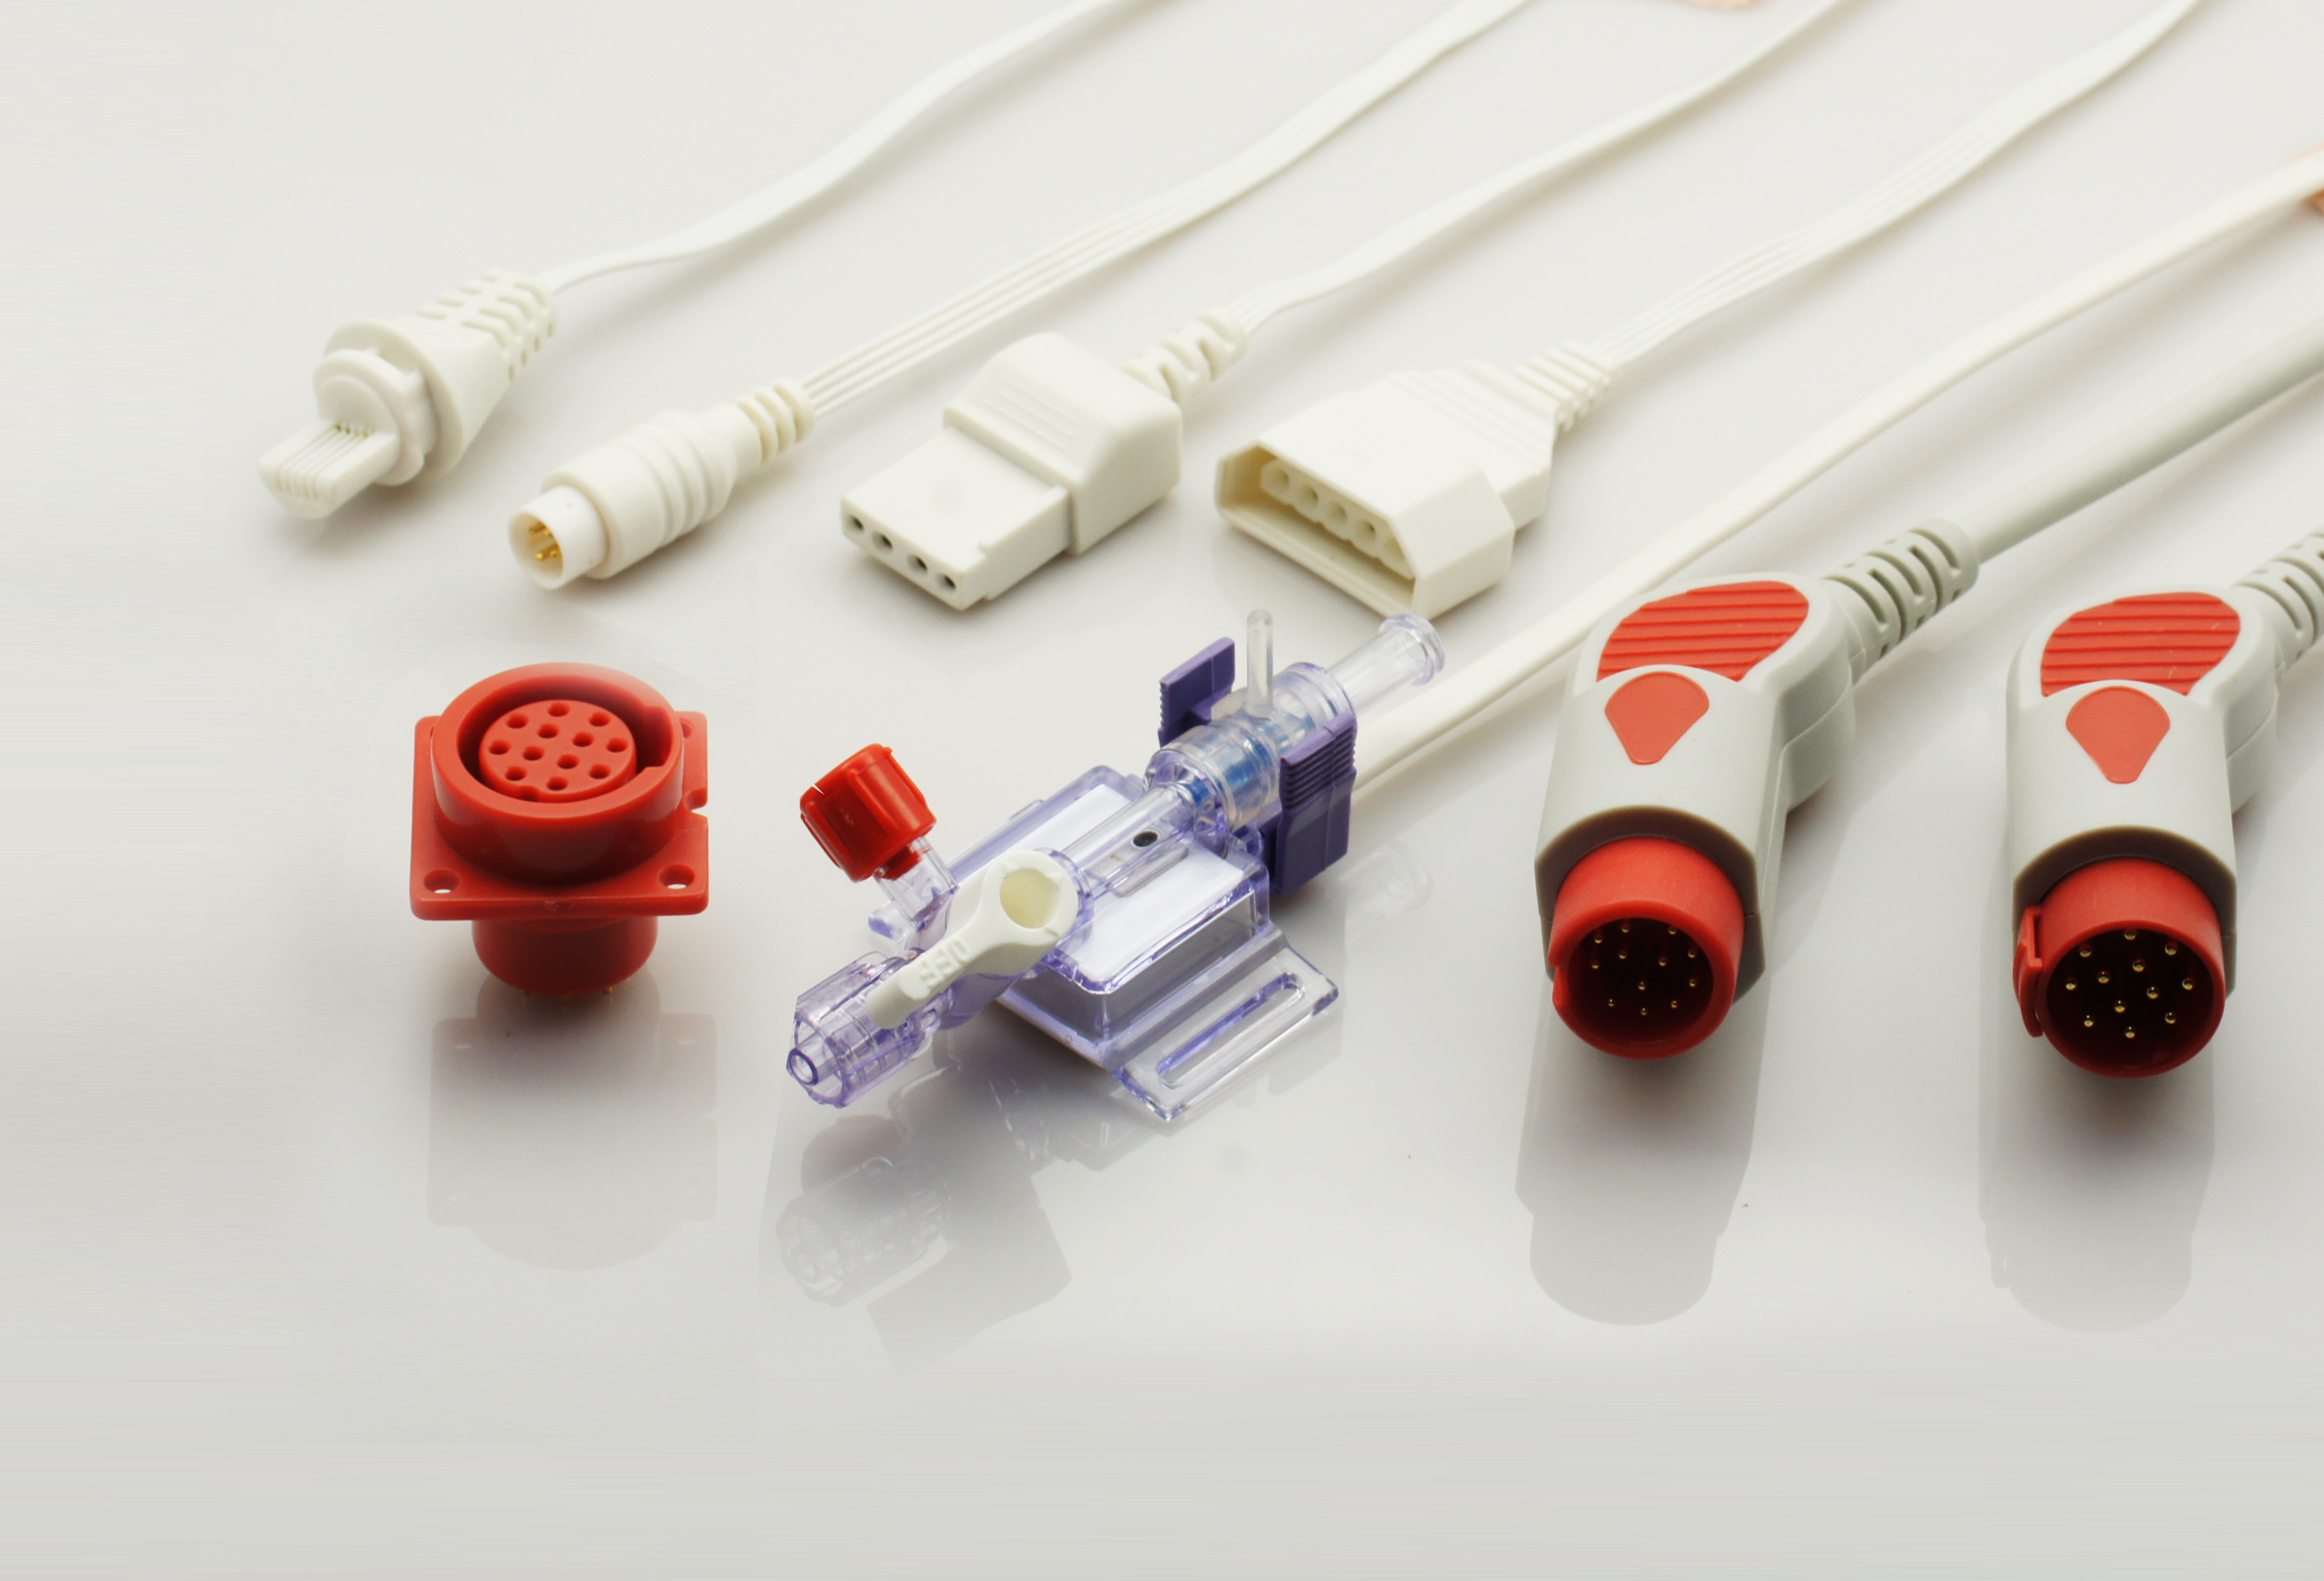 OEM/ODM China medical Compatible IBP Adapter, IBP cable and pressure transducers Featured Image